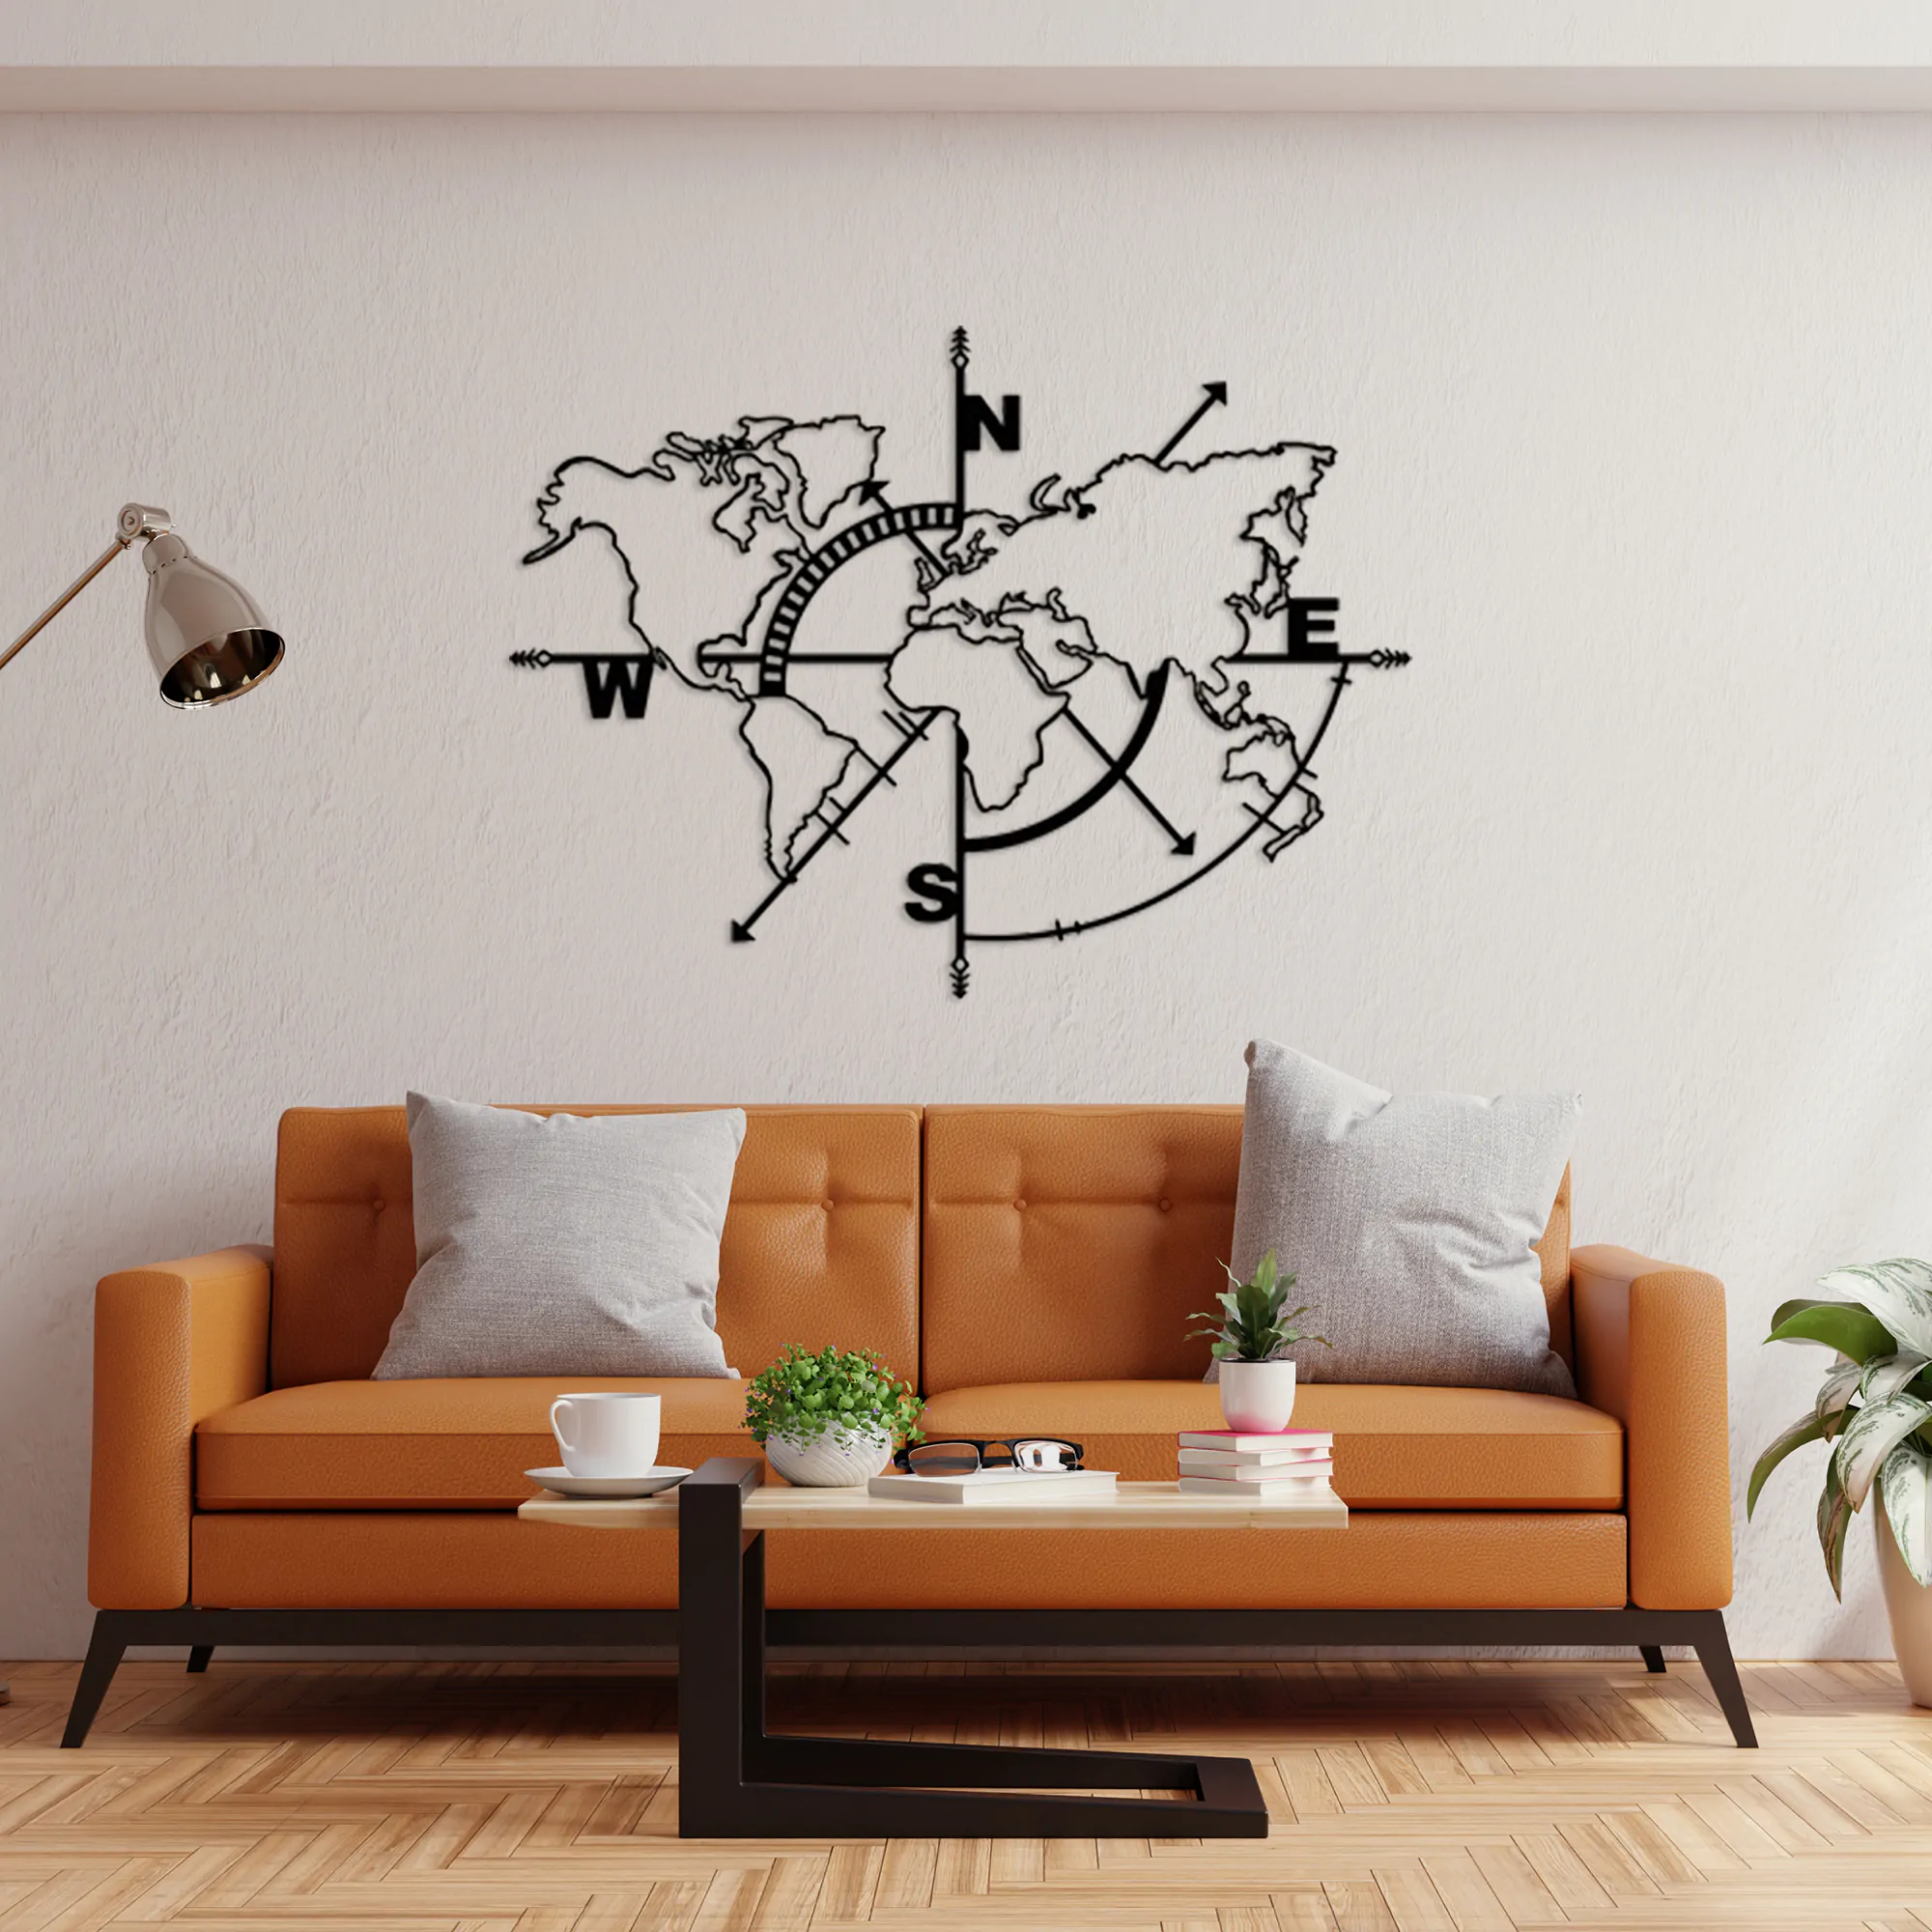 The Bright Side of the World Metal Wall Art